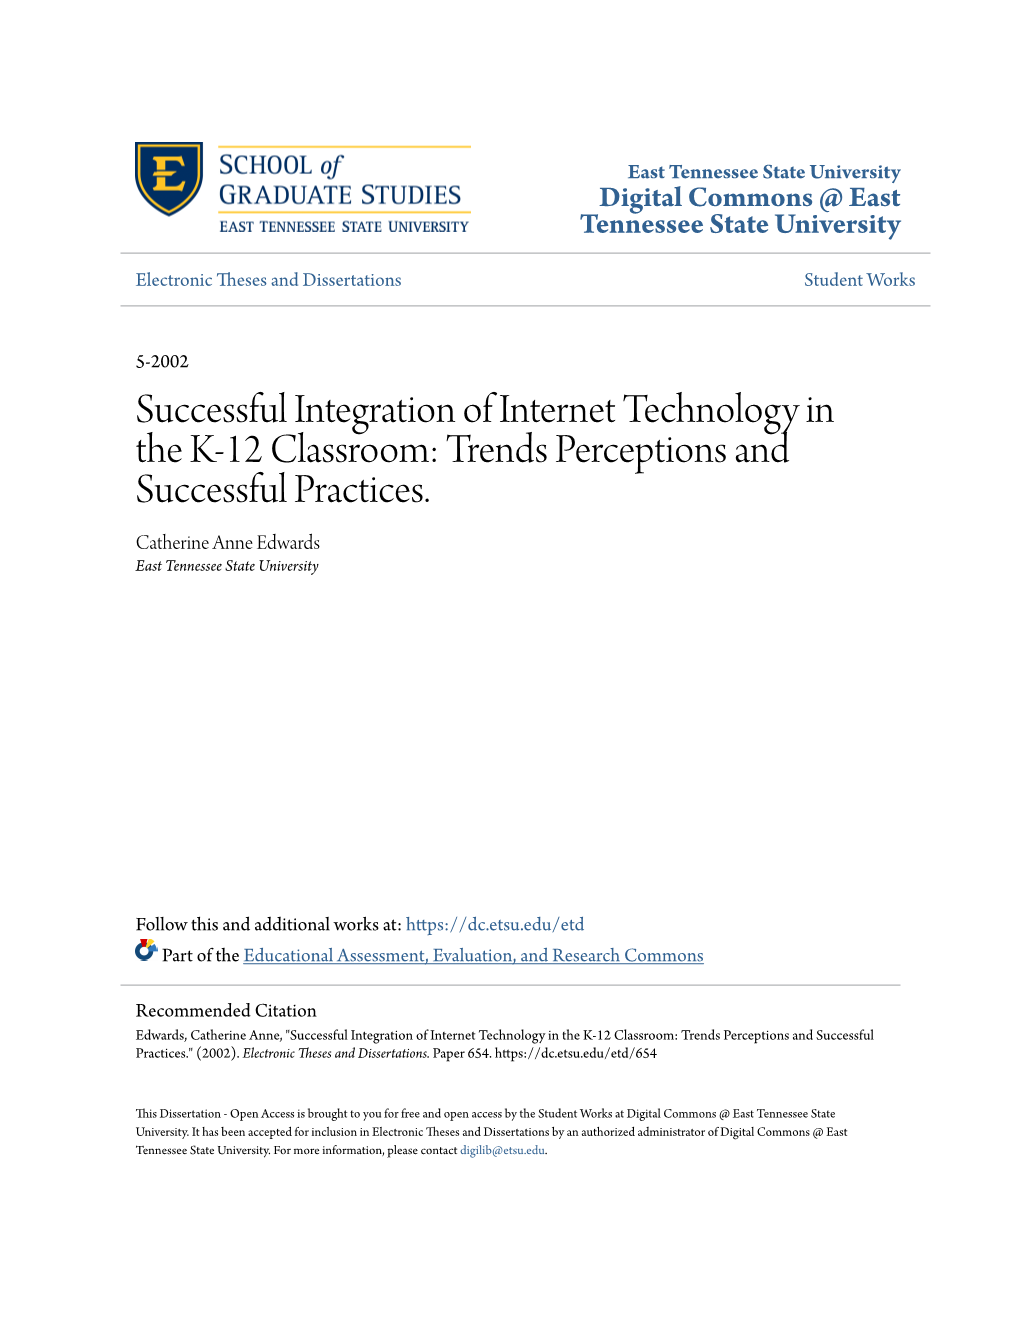 Successful Integration of Internet Technology in the K-12 Classroom: Trends Perceptions and Successful Practices